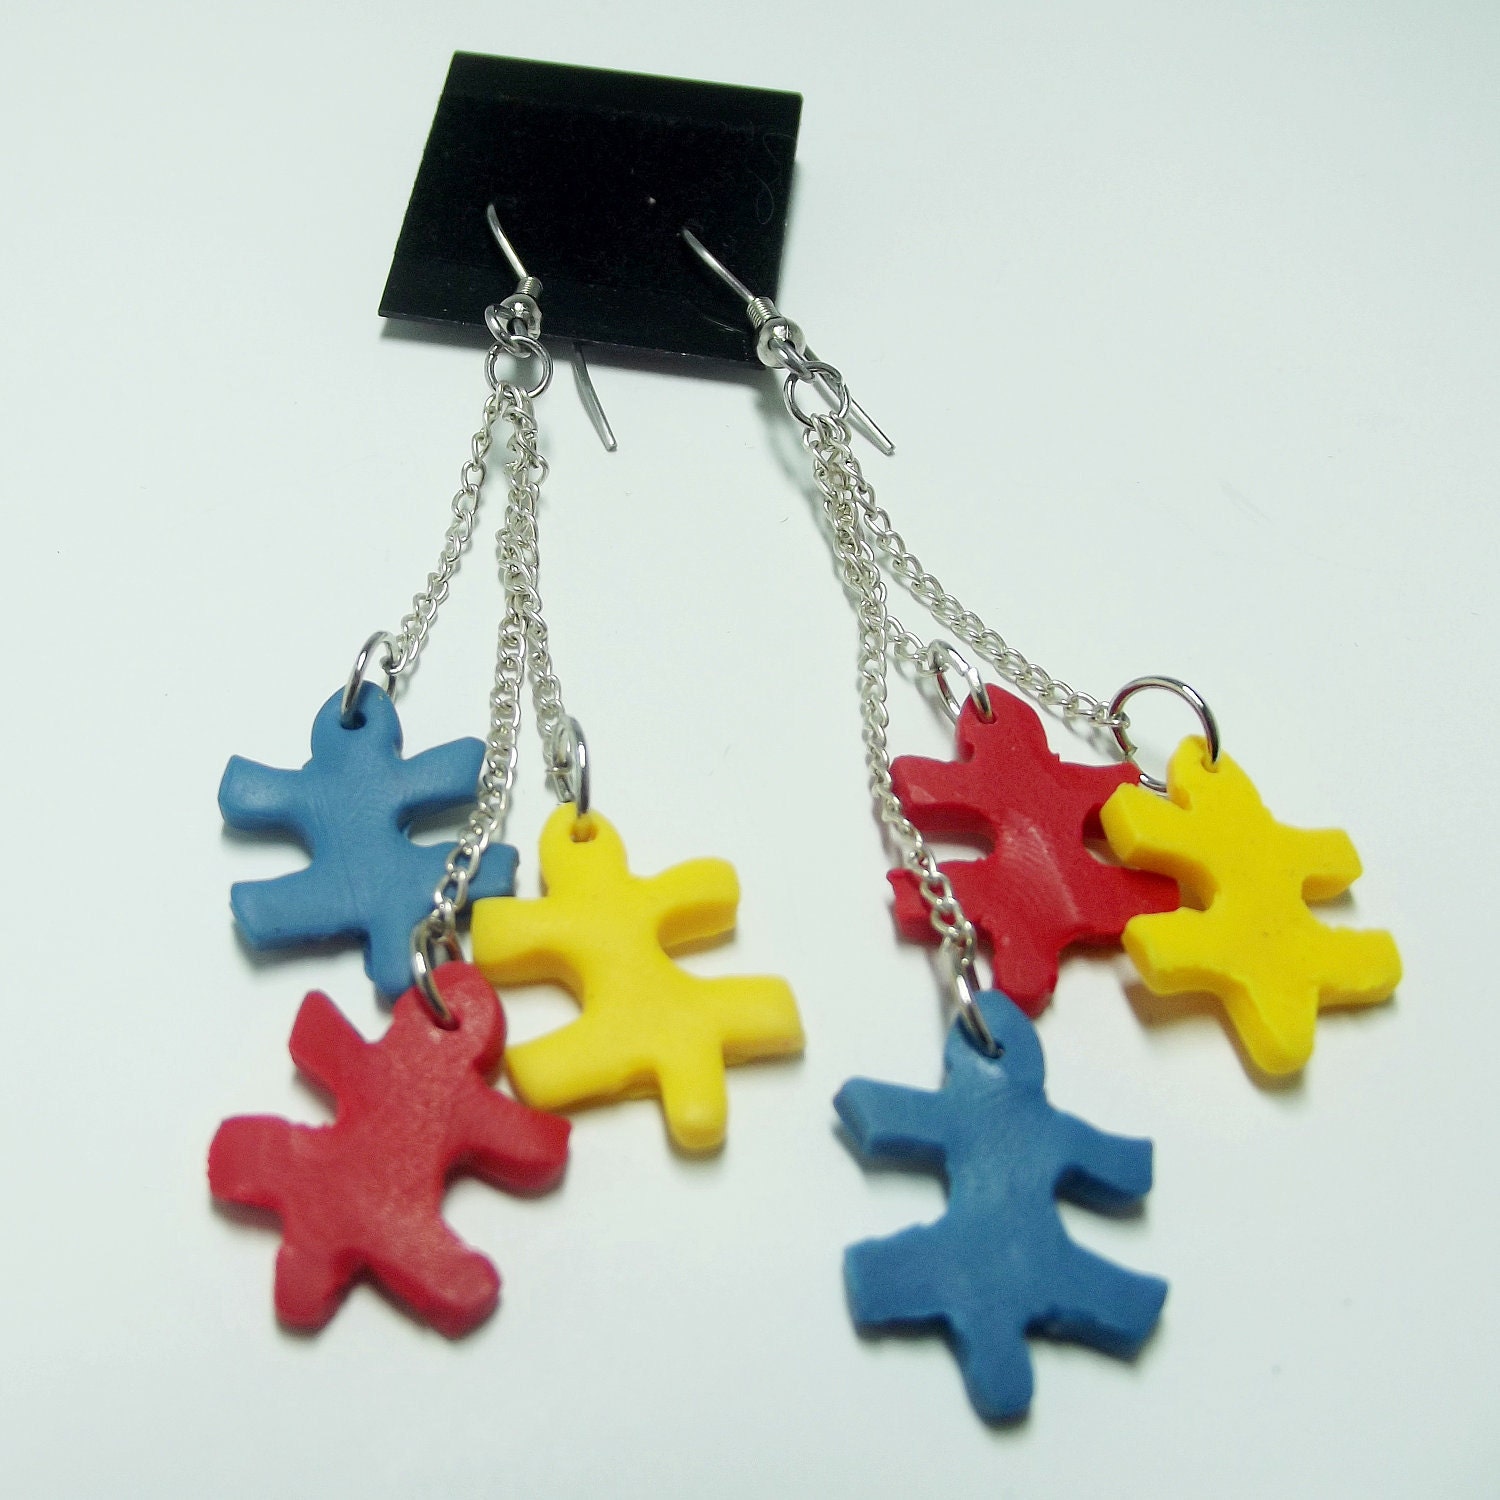 Autism Awareness polymer puzzle pattern earrings 2 inch